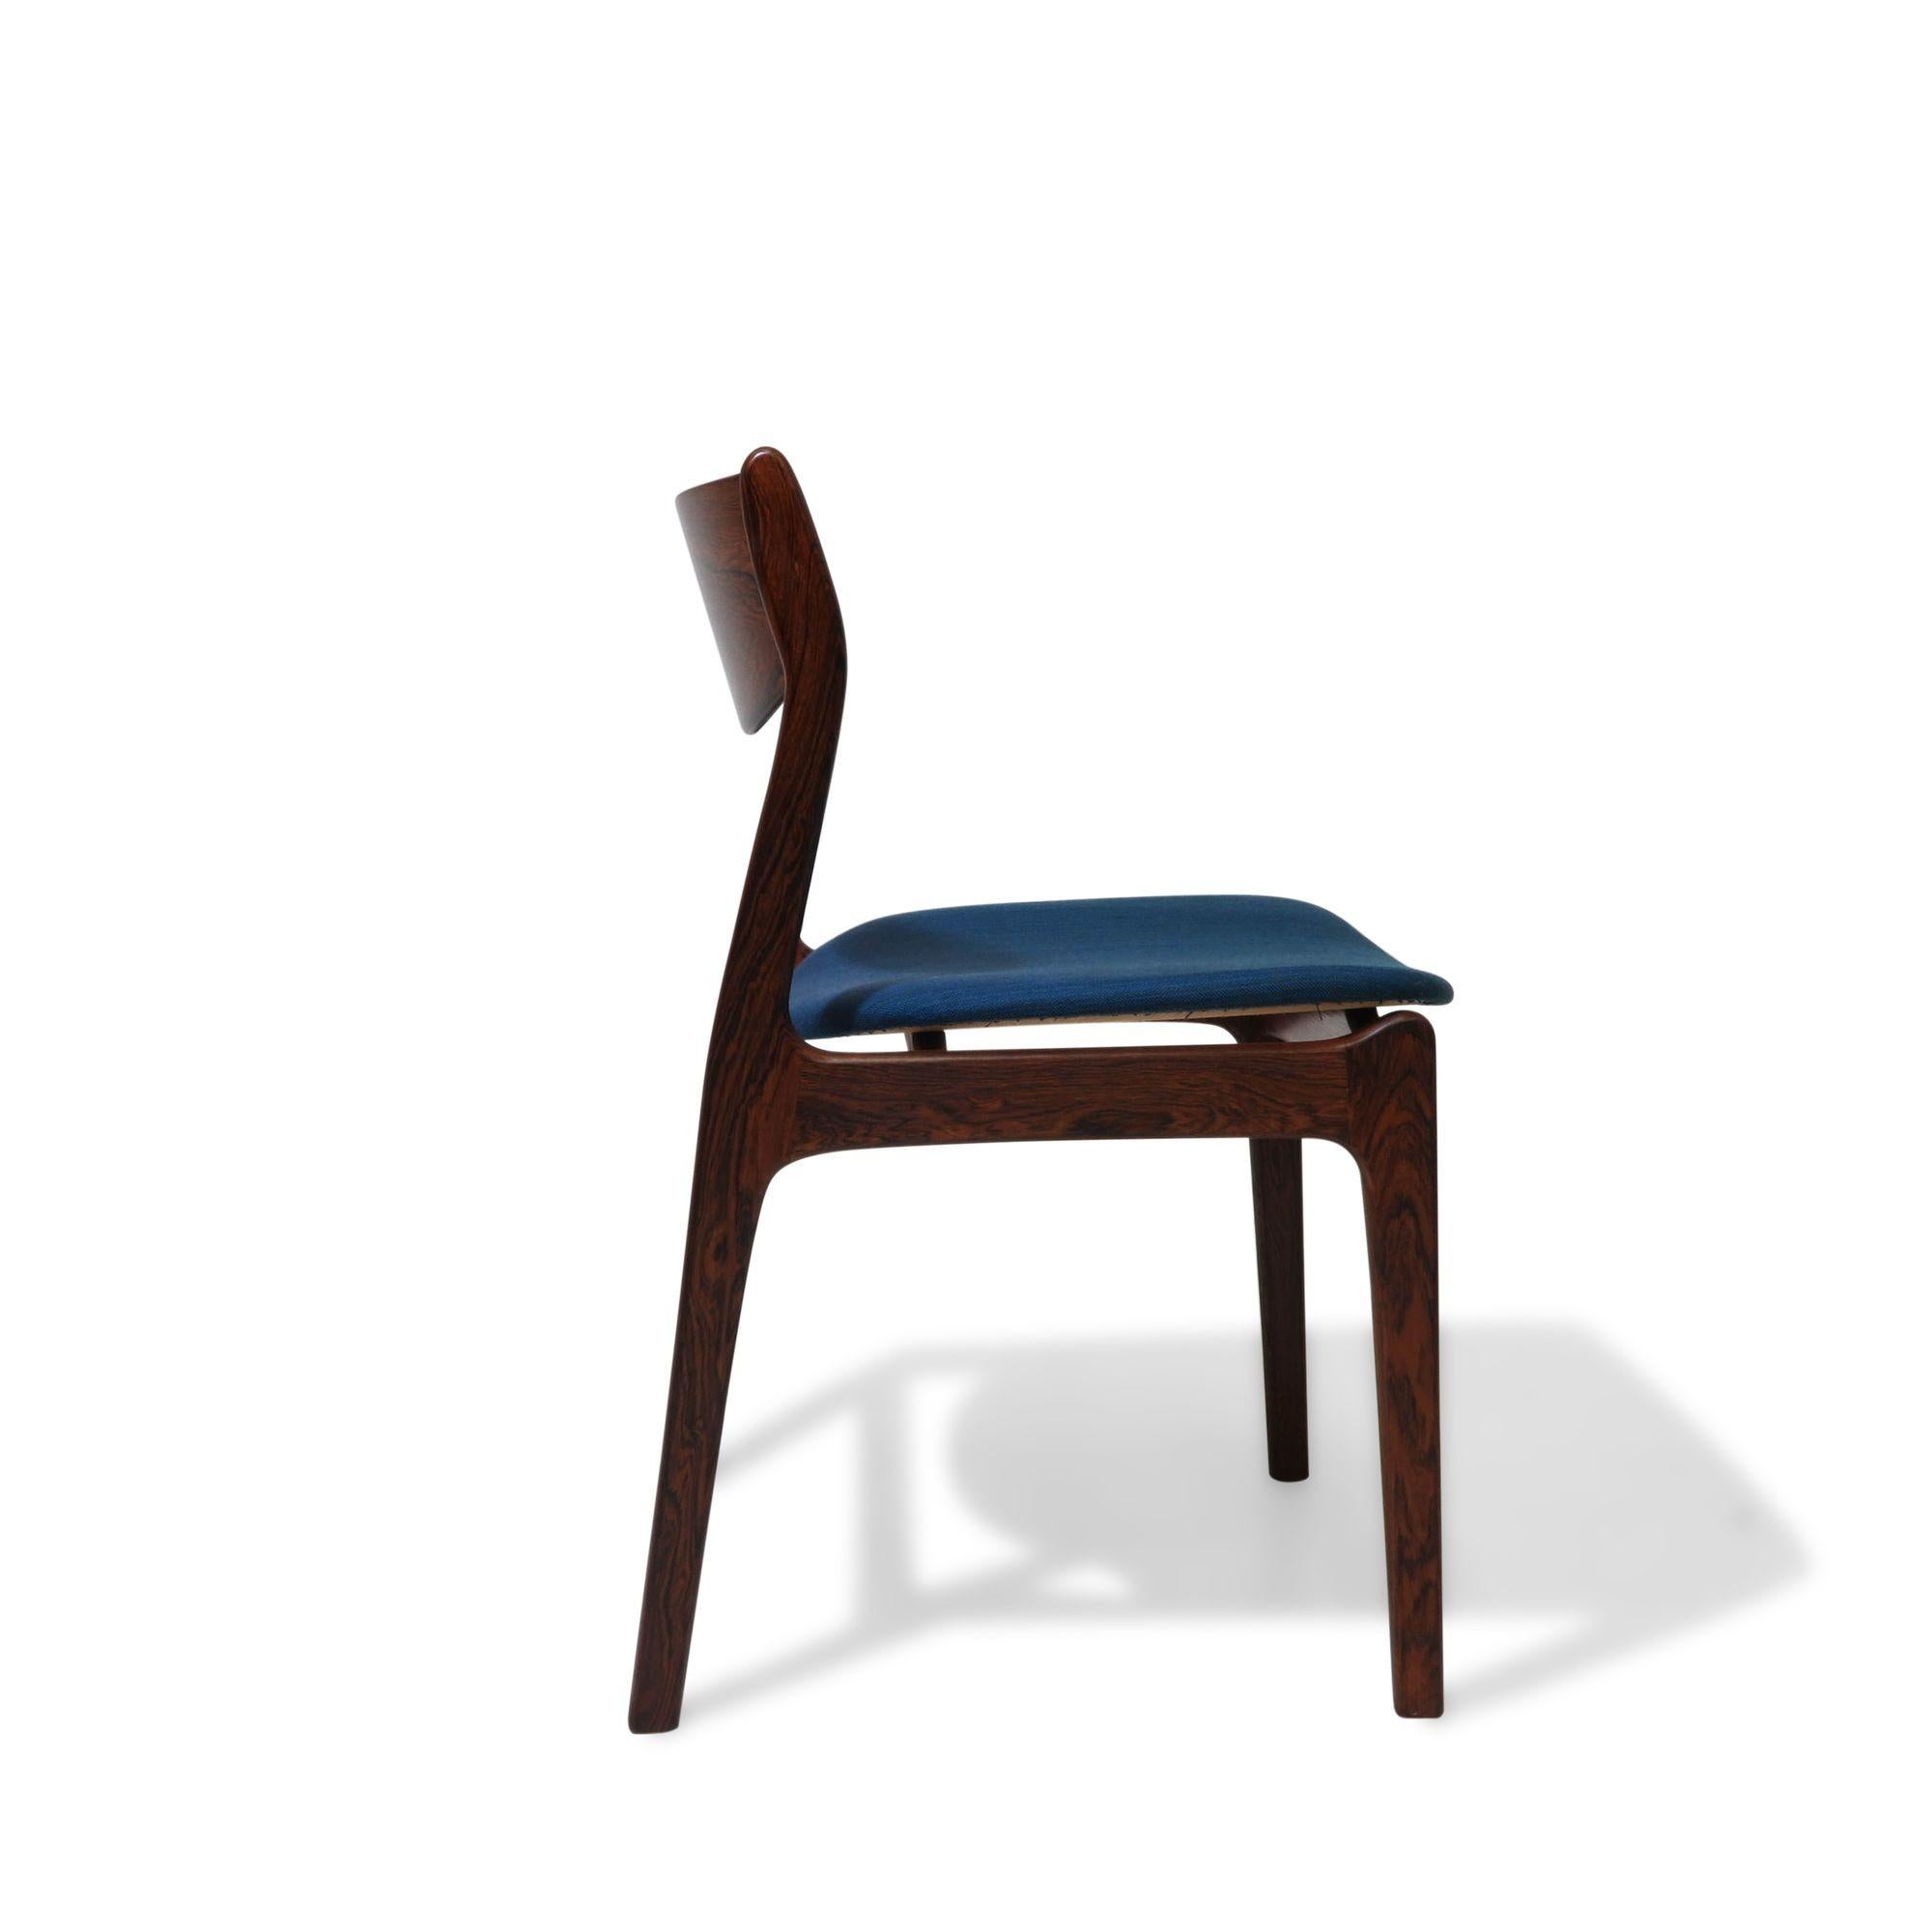 Brazilian Rosewood PE Jorgensen Danish Dining Chairs In Excellent Condition For Sale In Oakland, CA